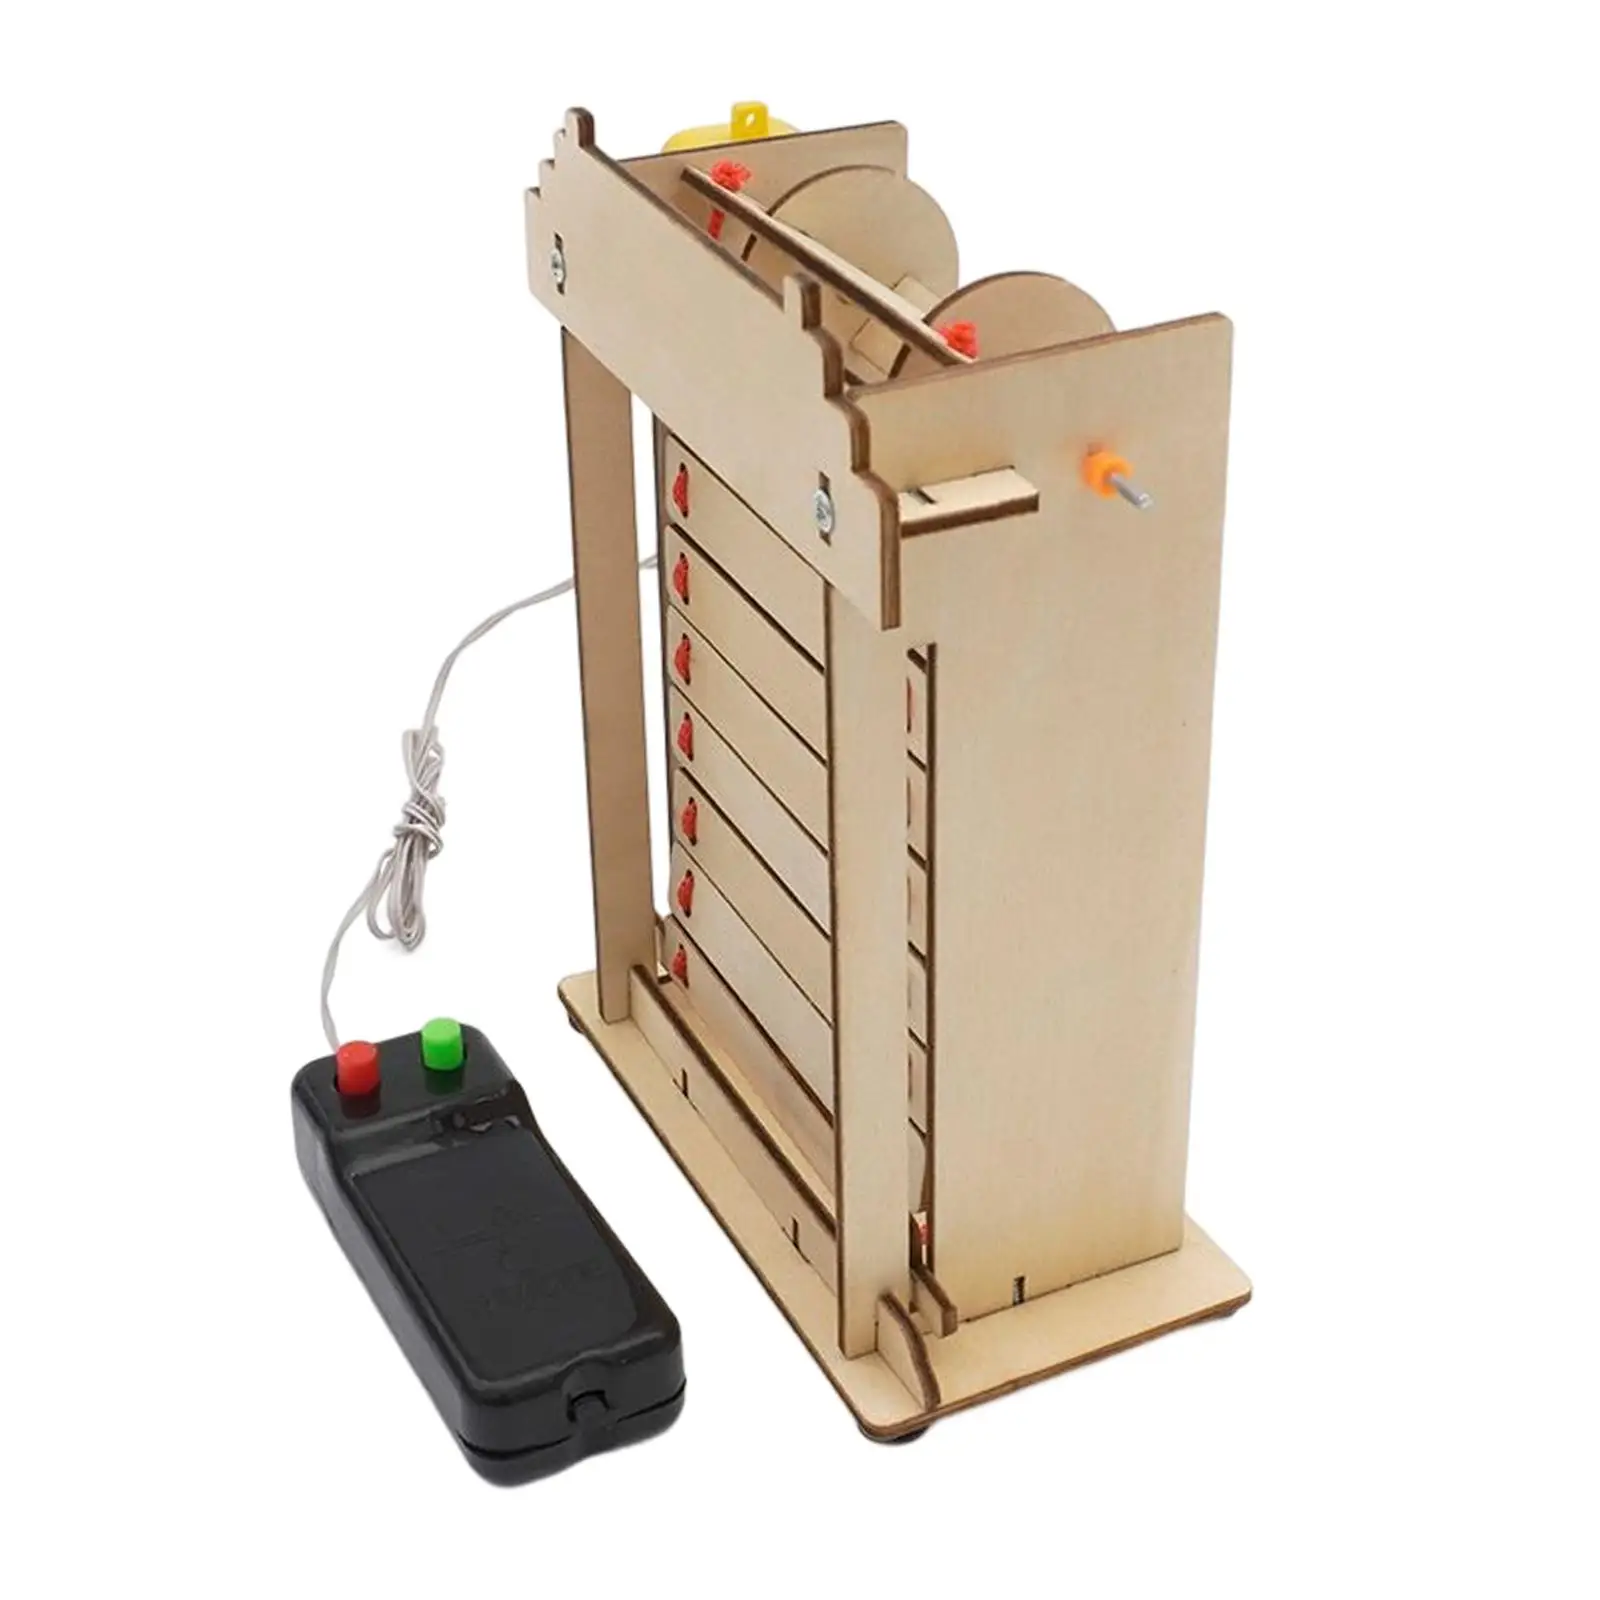 DIY Wooden Electric Gate, Science Experiment Model, Physics Educational Toy, Science Experiment